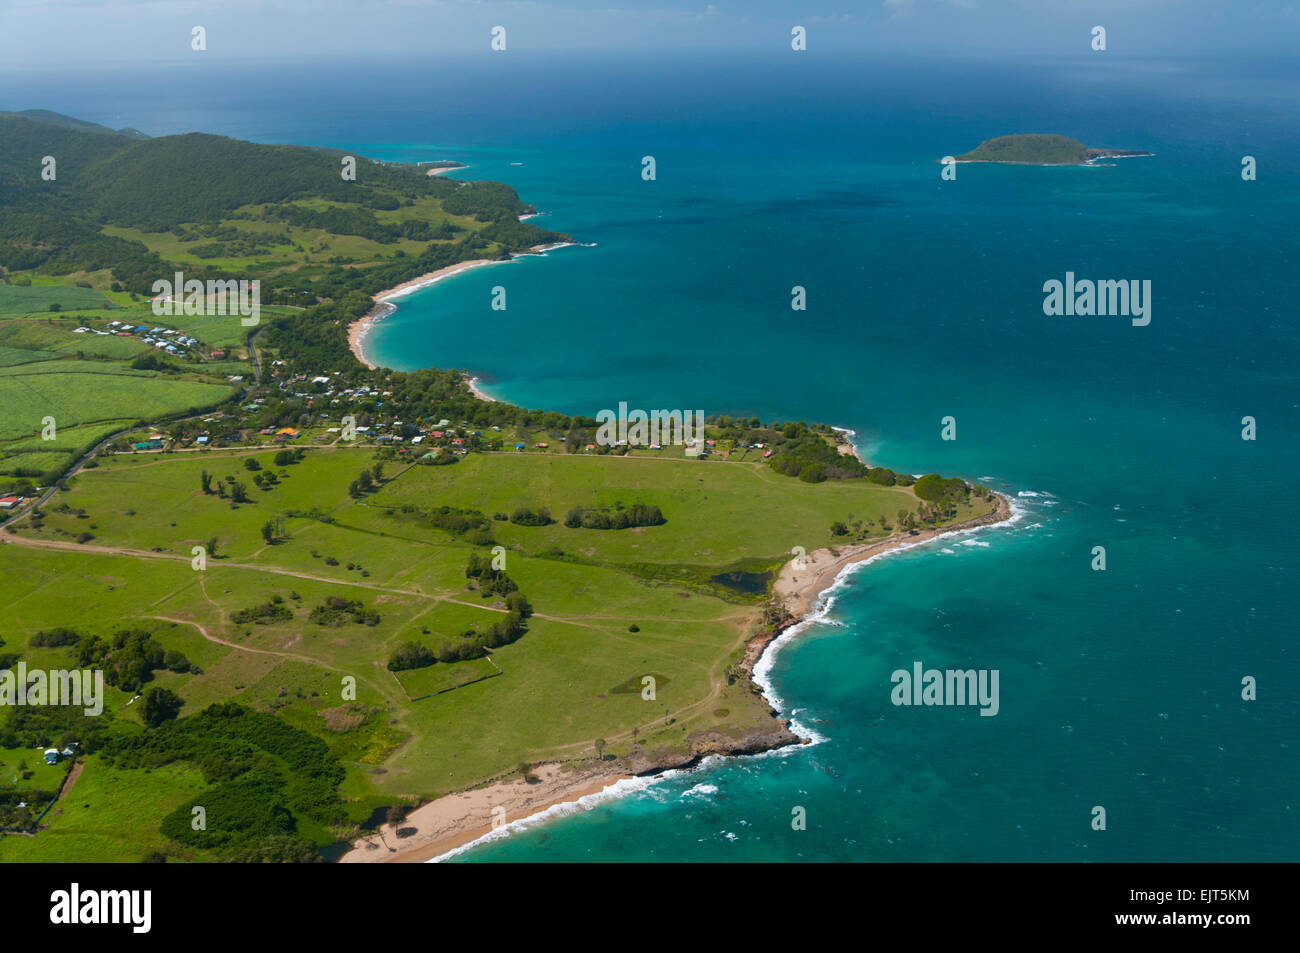 Sainte Rose Guadeloupe High Resolution Stock Photography and Images - Alamy